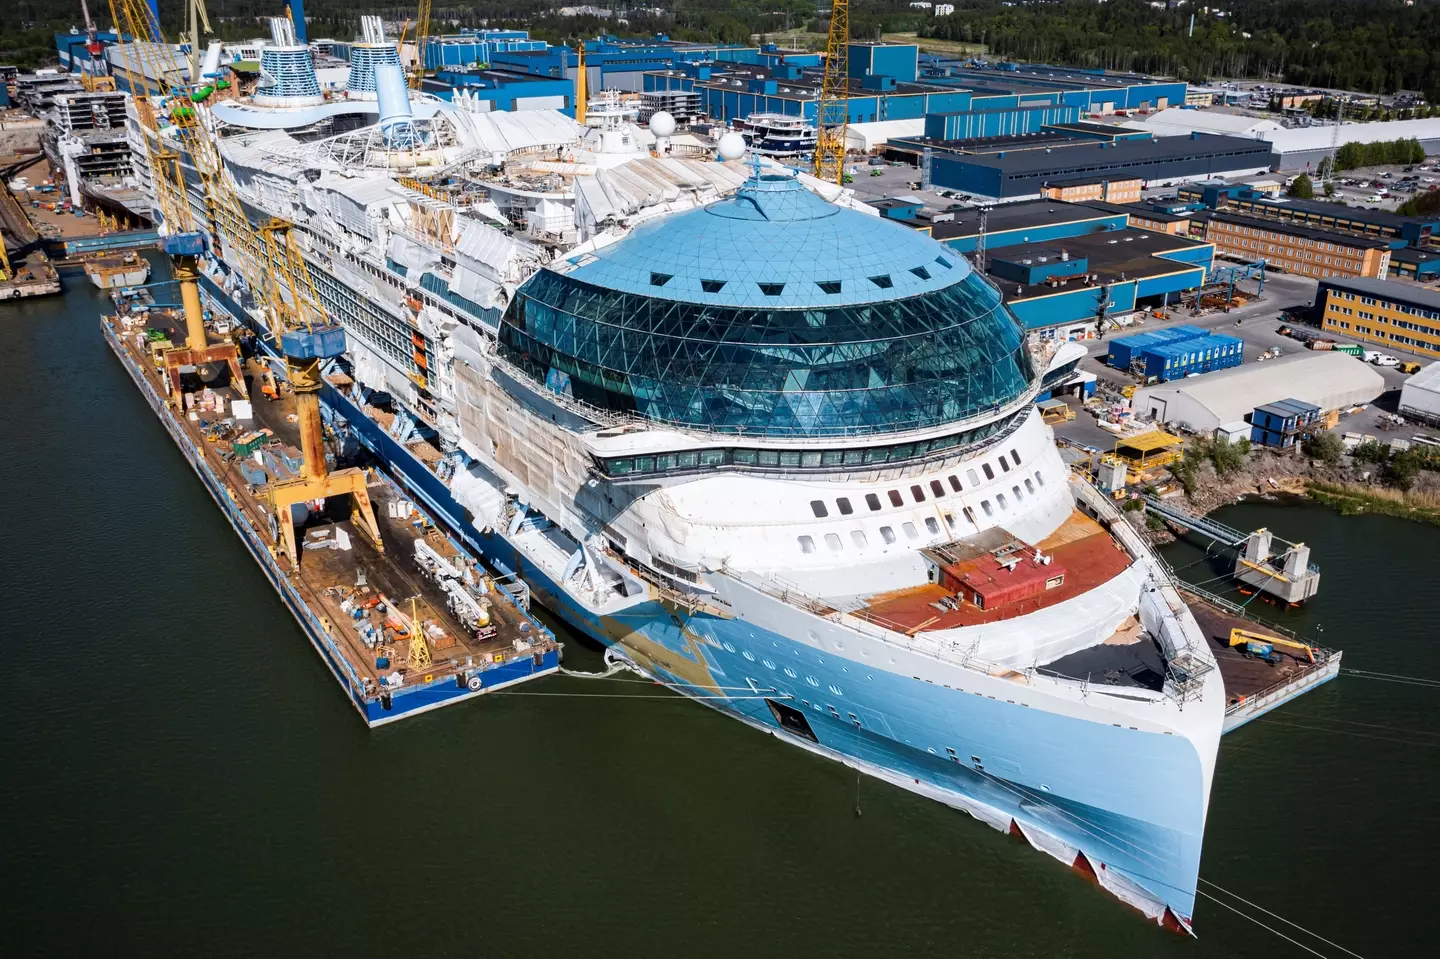 The enormous Icon of the Seas took over 2 years to create.